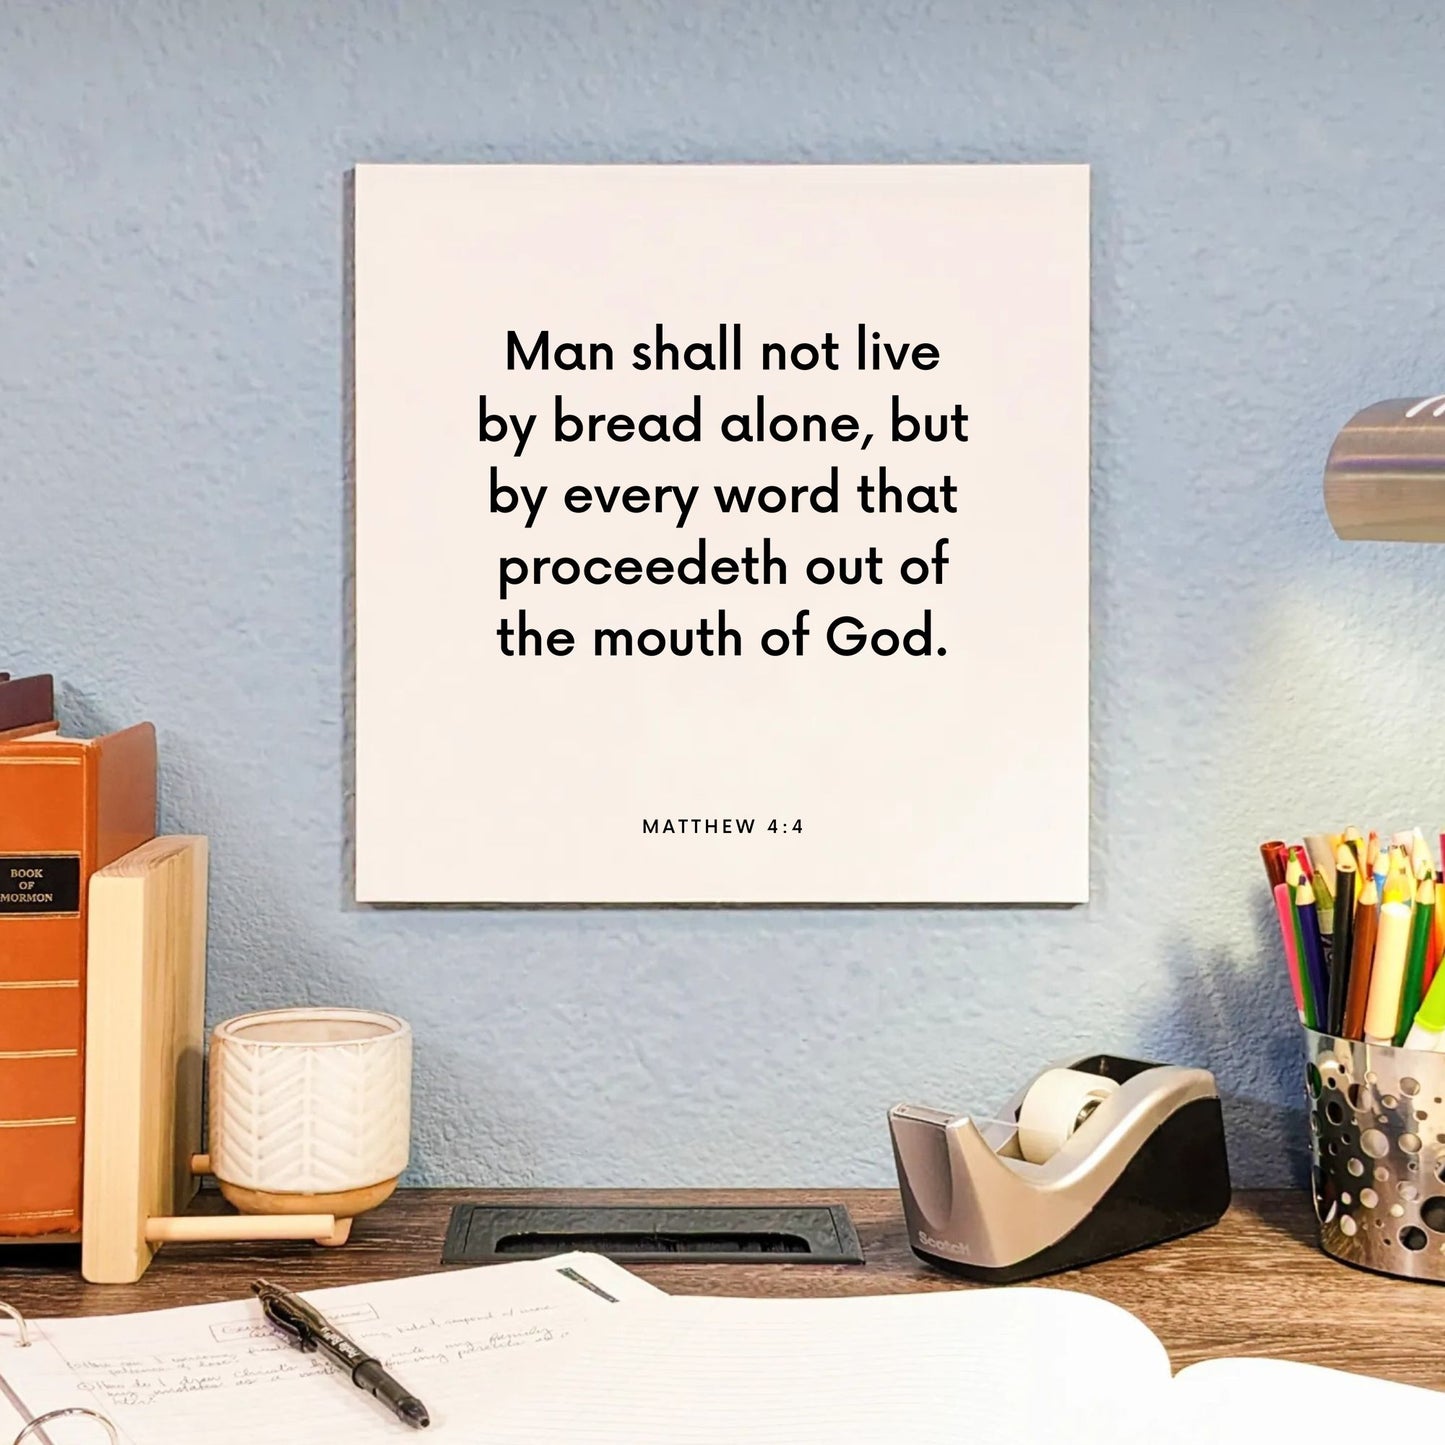 Desk mouting of the scripture tile for Matthew 4:4 - "Man shall not live by bread alone, but by every word"